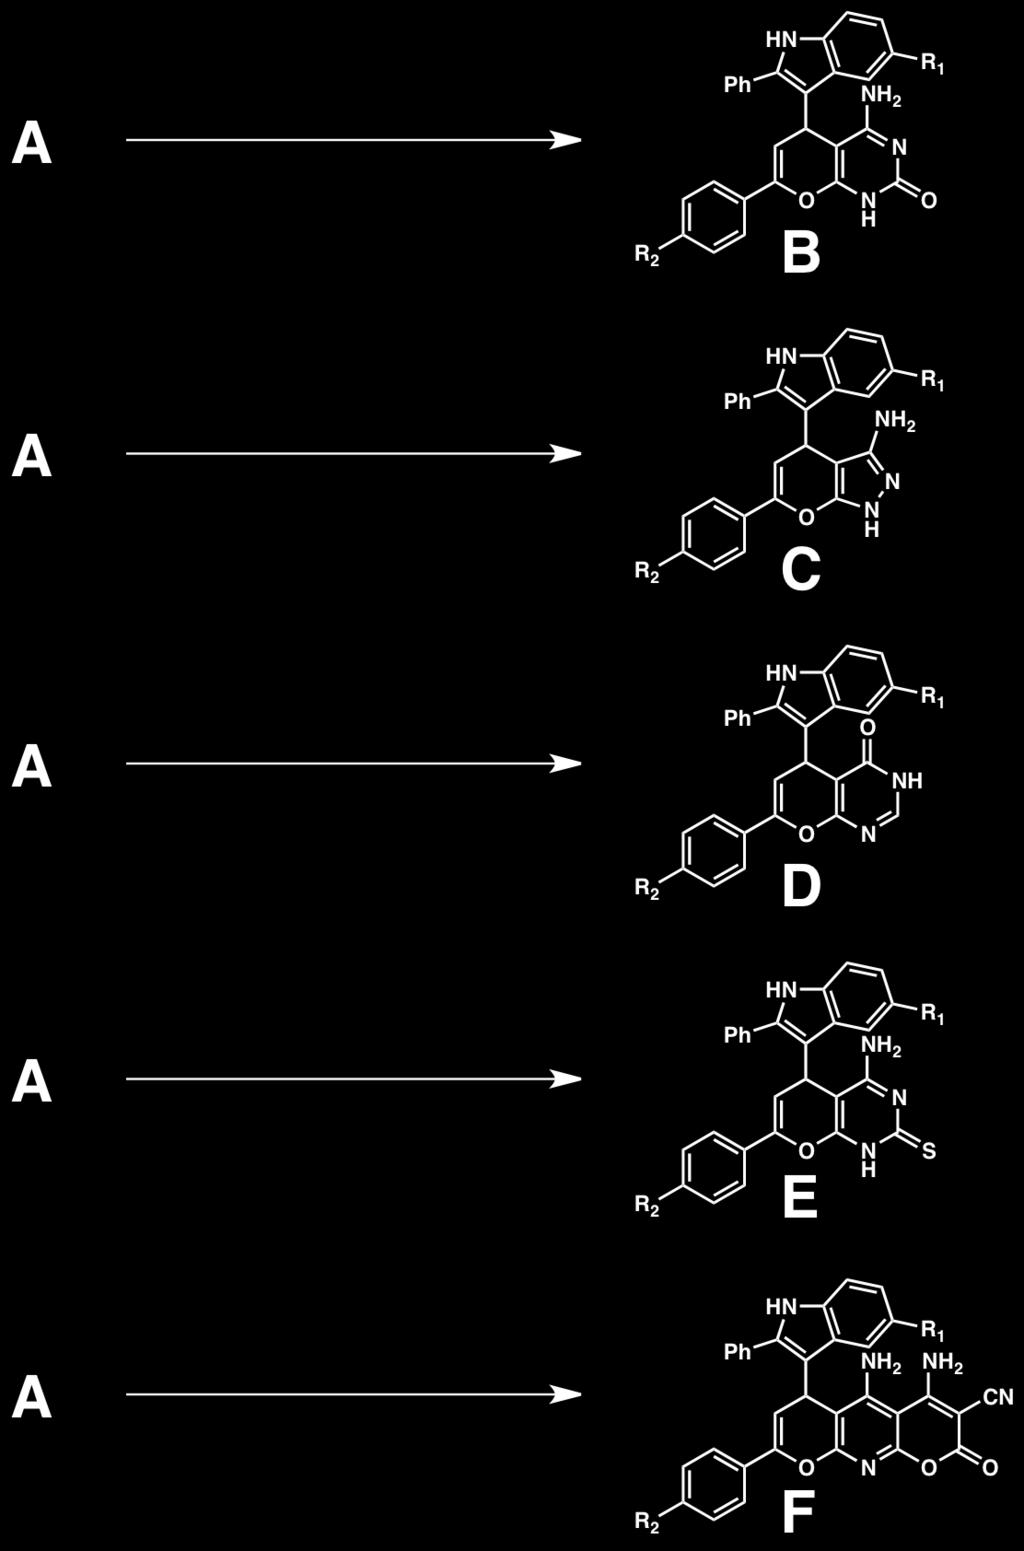 Propose a retrosynthesis (no forward synthesis necessary) of common precursor (A) (5 points) and then provide